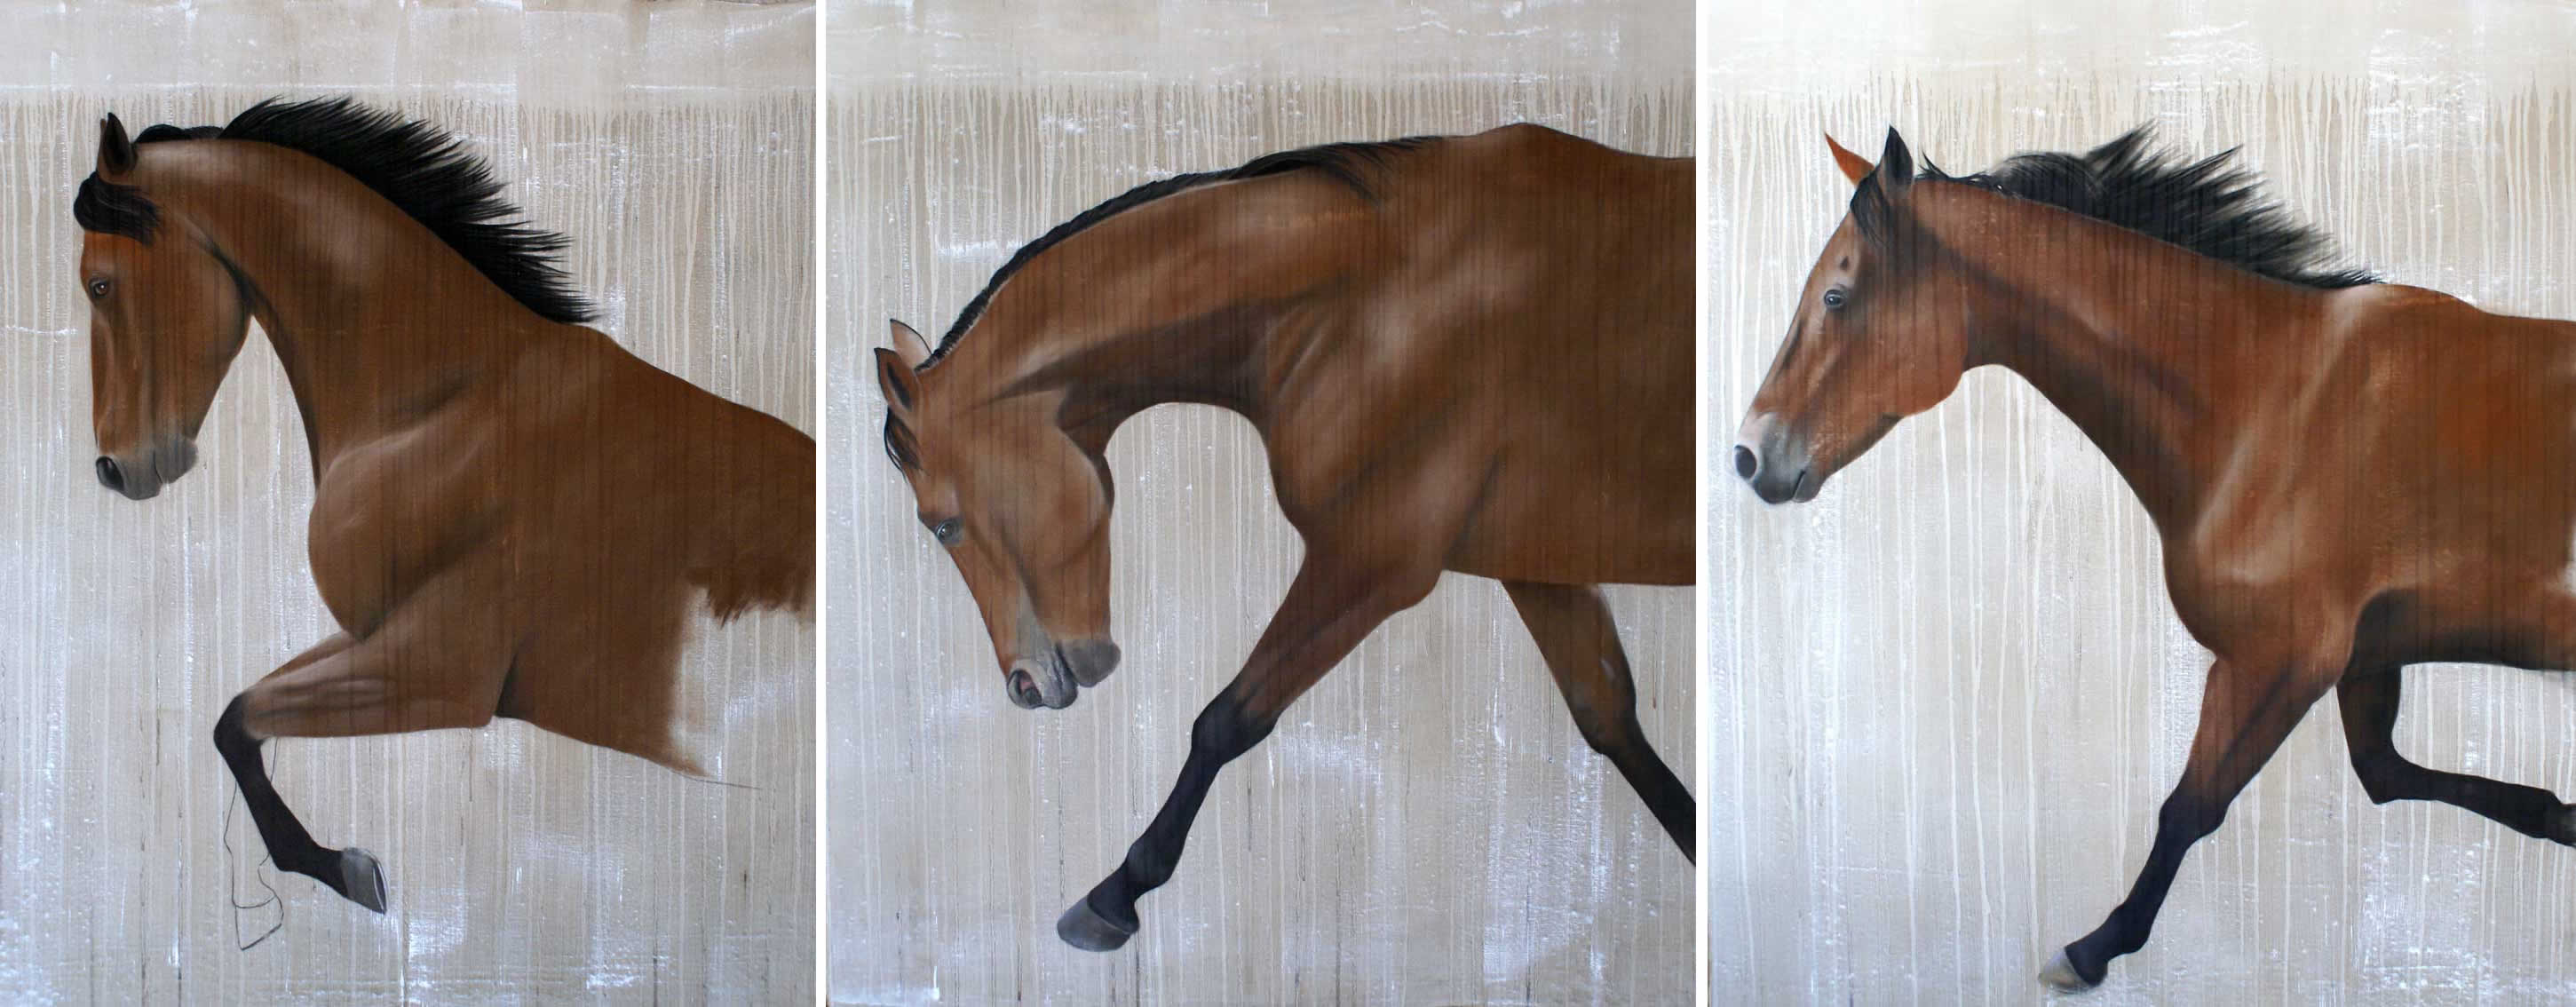 Tryptique-NEWMAC arabian-thoroughbred-horse Thierry Bisch Contemporary painter animals painting art  nature biodiversity conservation 